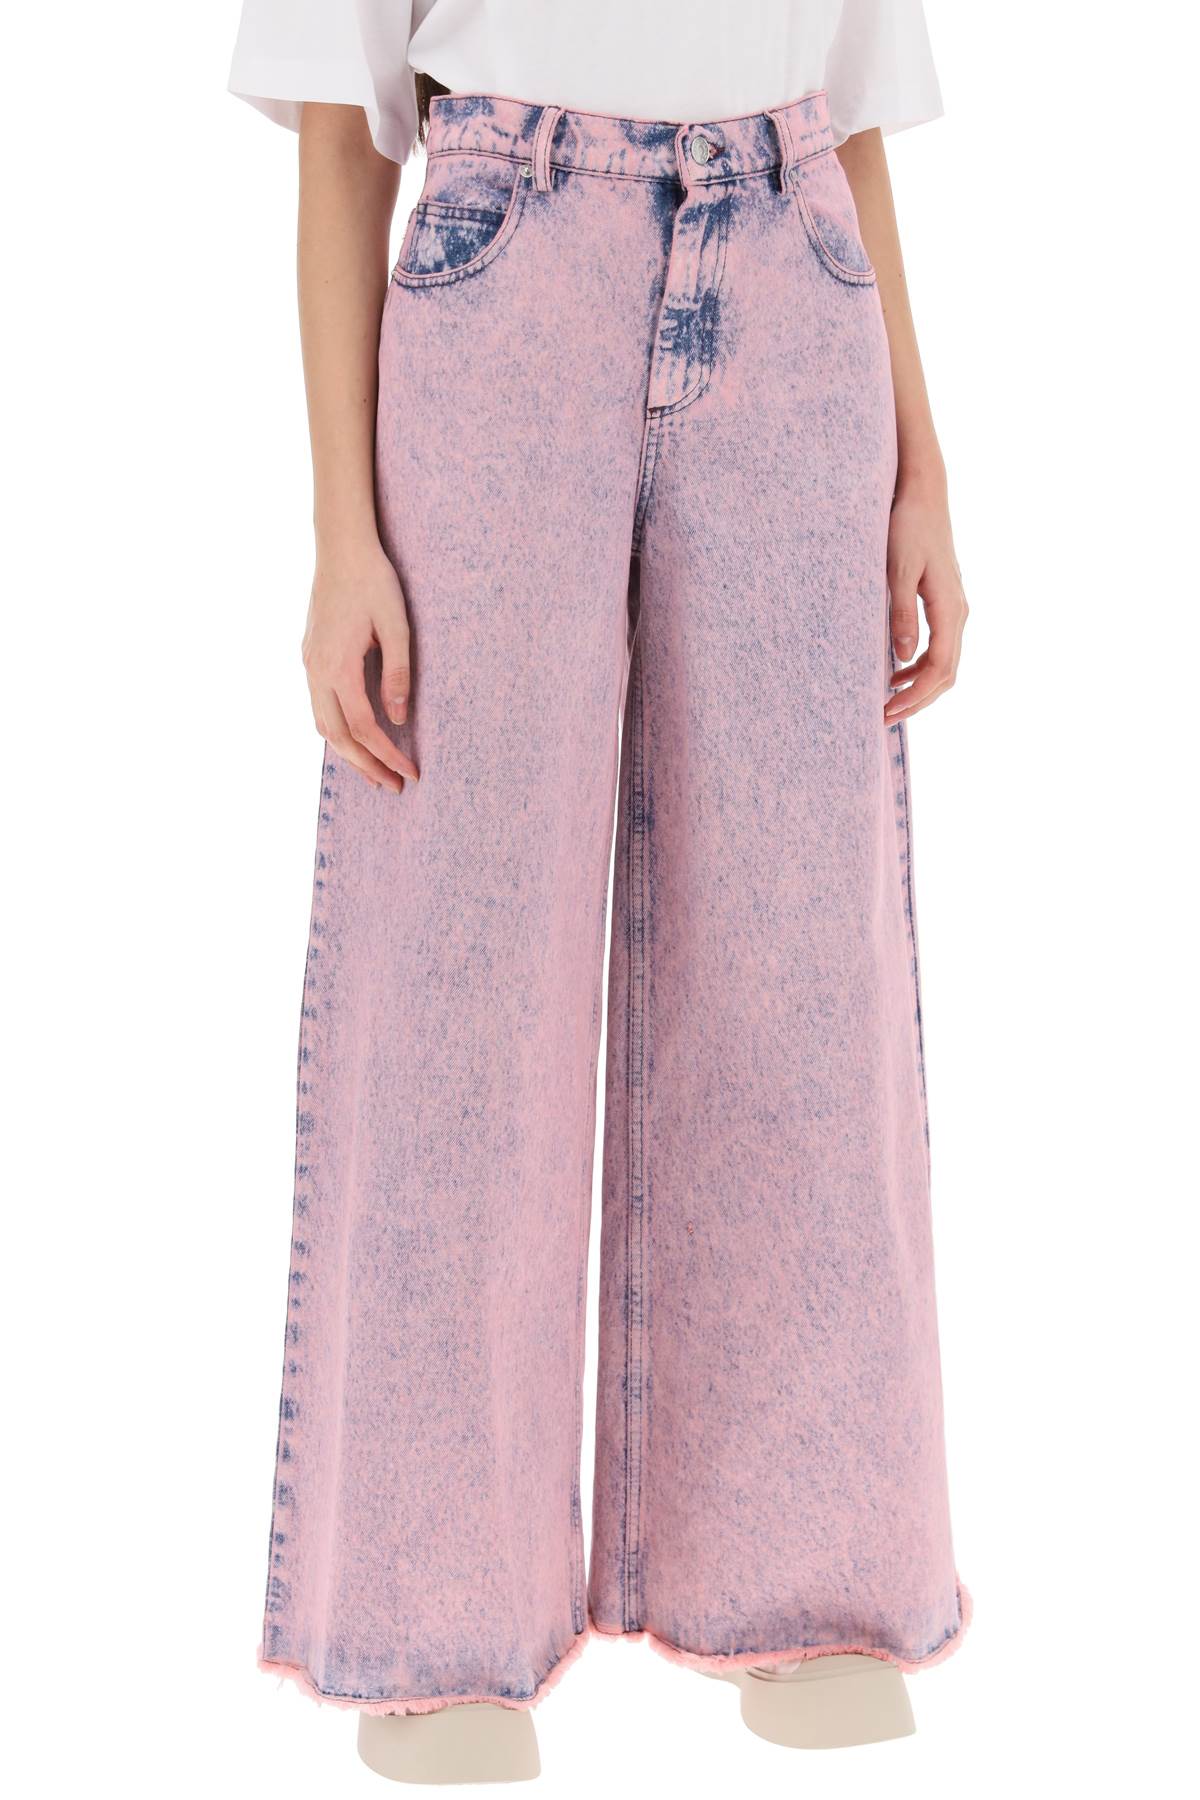 Marni wide leg jeans in overdyed denim-1